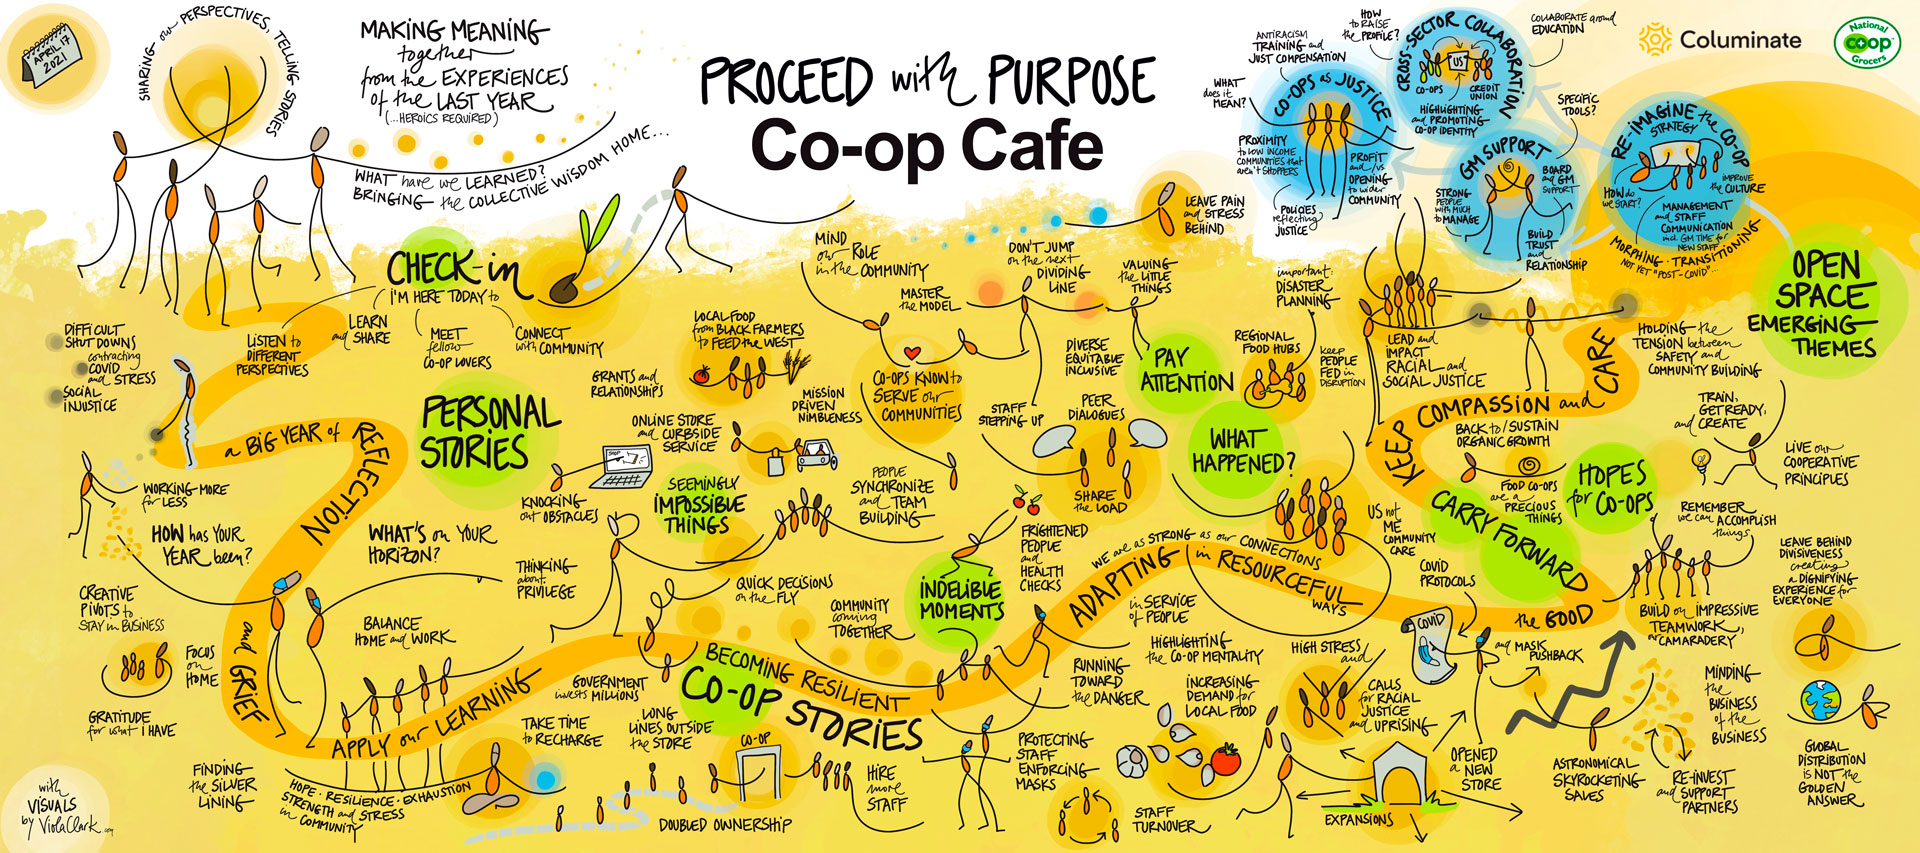 Co-op Cafe - Proceed with Purpose